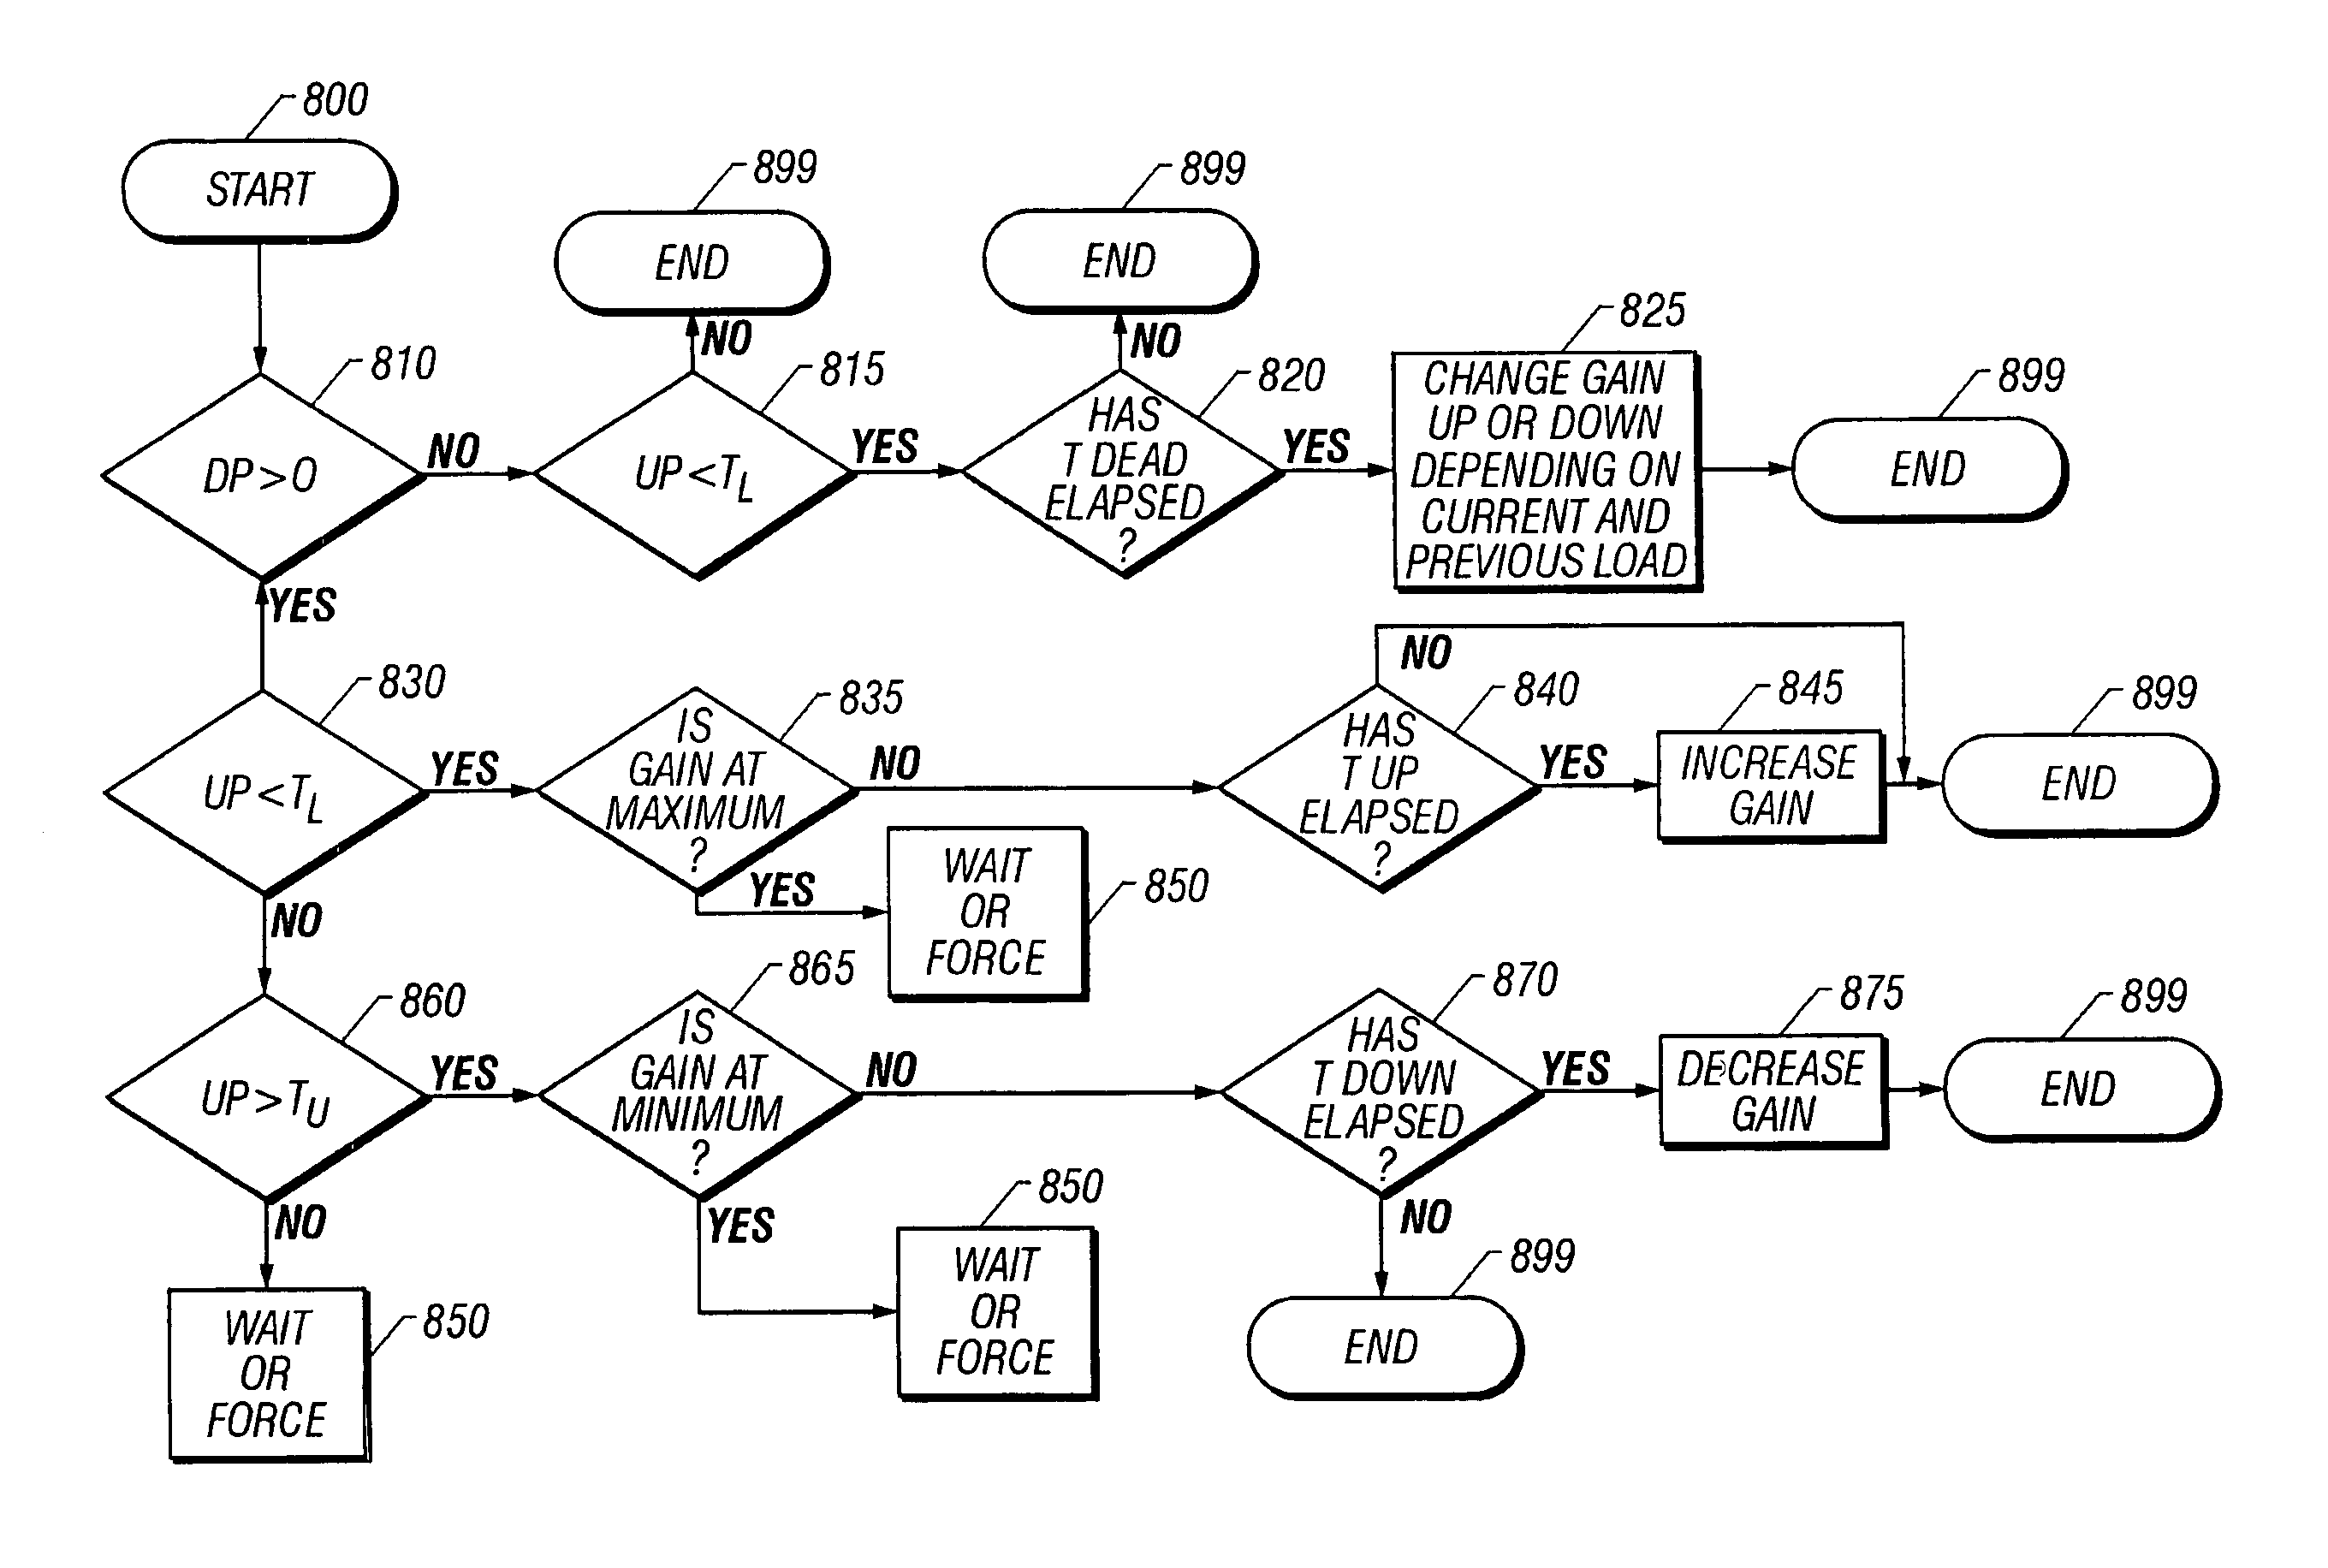 Long subscriber loops using automatic gain control mid-span extender unit